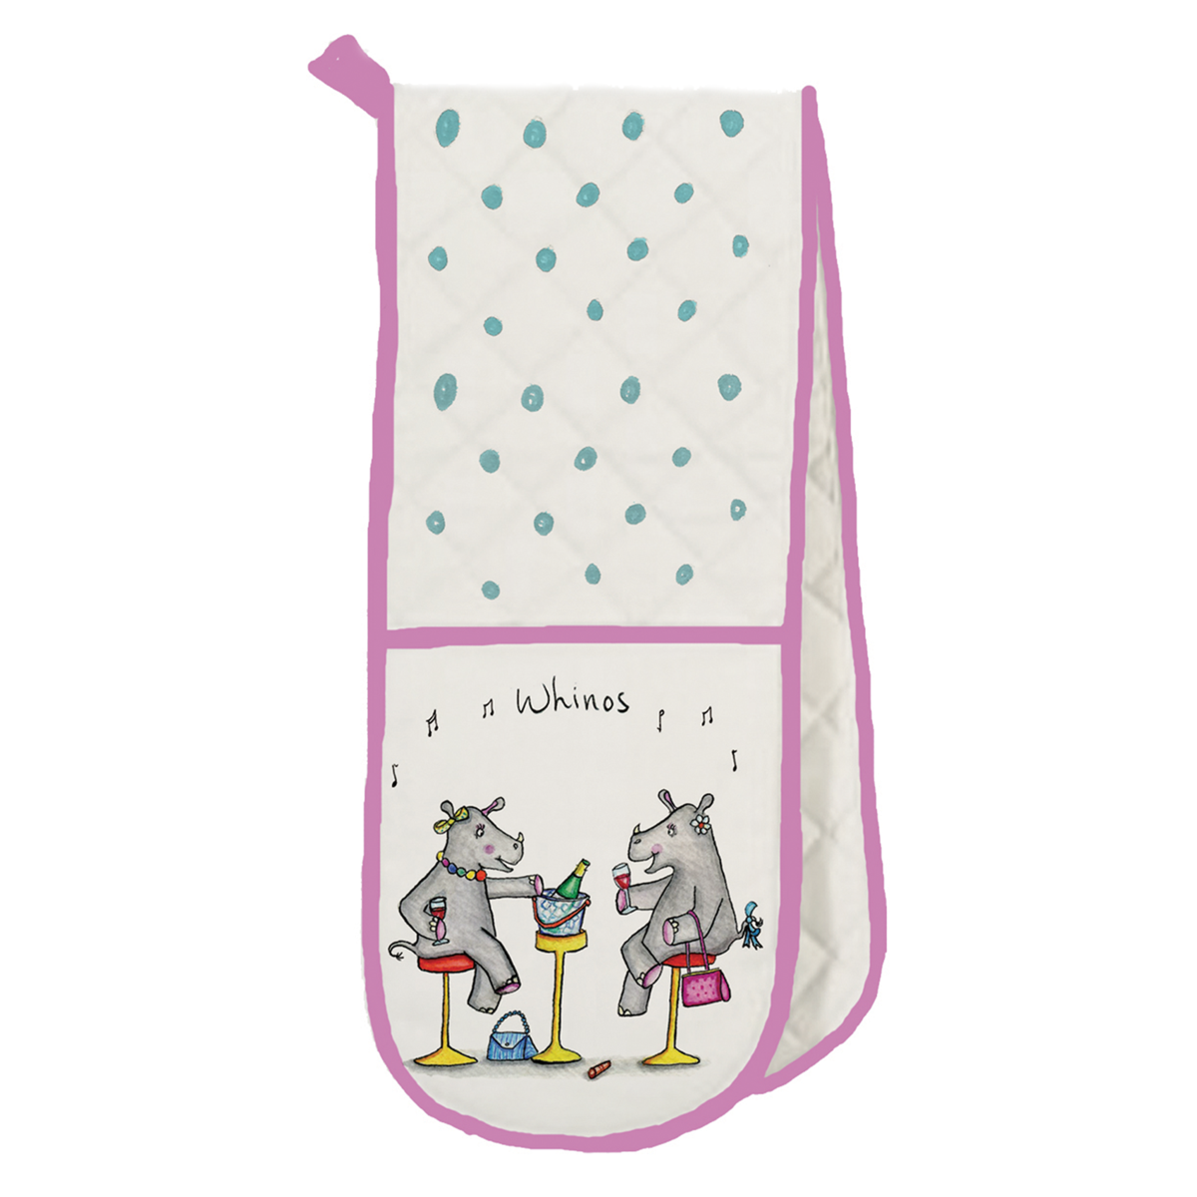 Whinos Rhinos Funny Oven Gloves